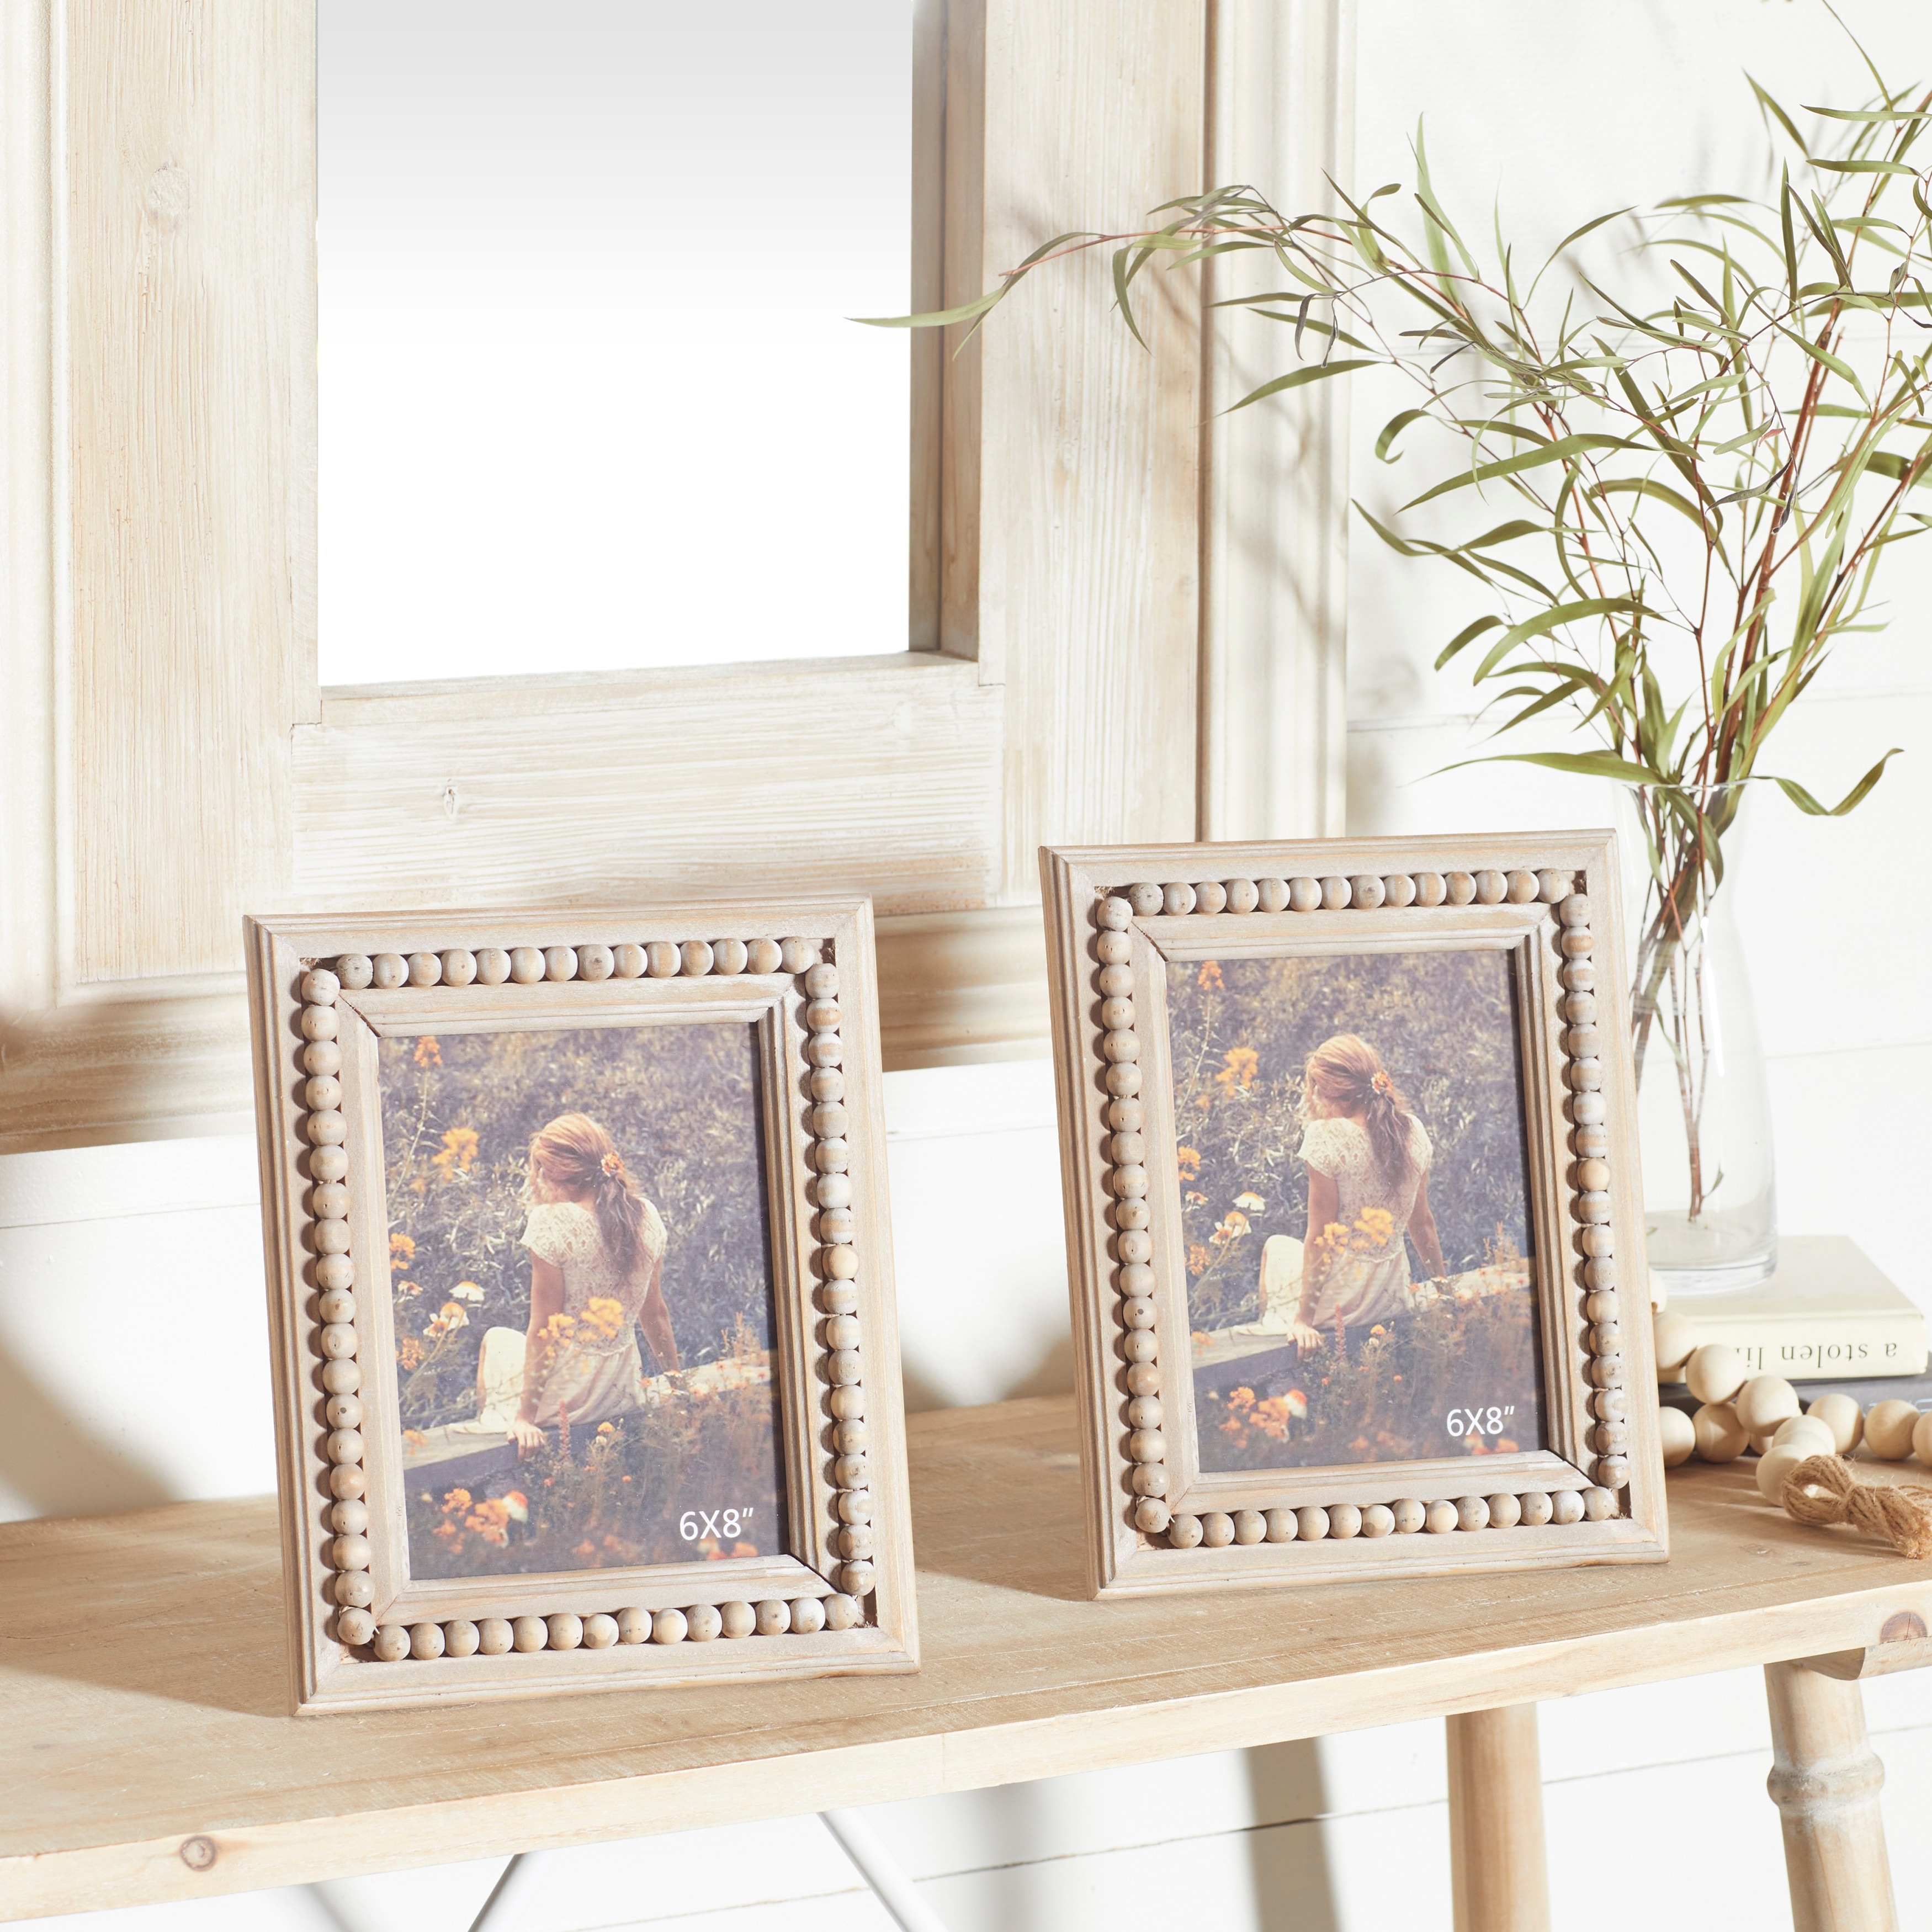 https://ak1.ostkcdn.com/images/products/is/images/direct/2497faad13532ef0cb03e9dde299e33061e079bf/Light-Brown-Wood-Bohemian-Photo-Frame-Standard-%28Set-of-2%29.jpg